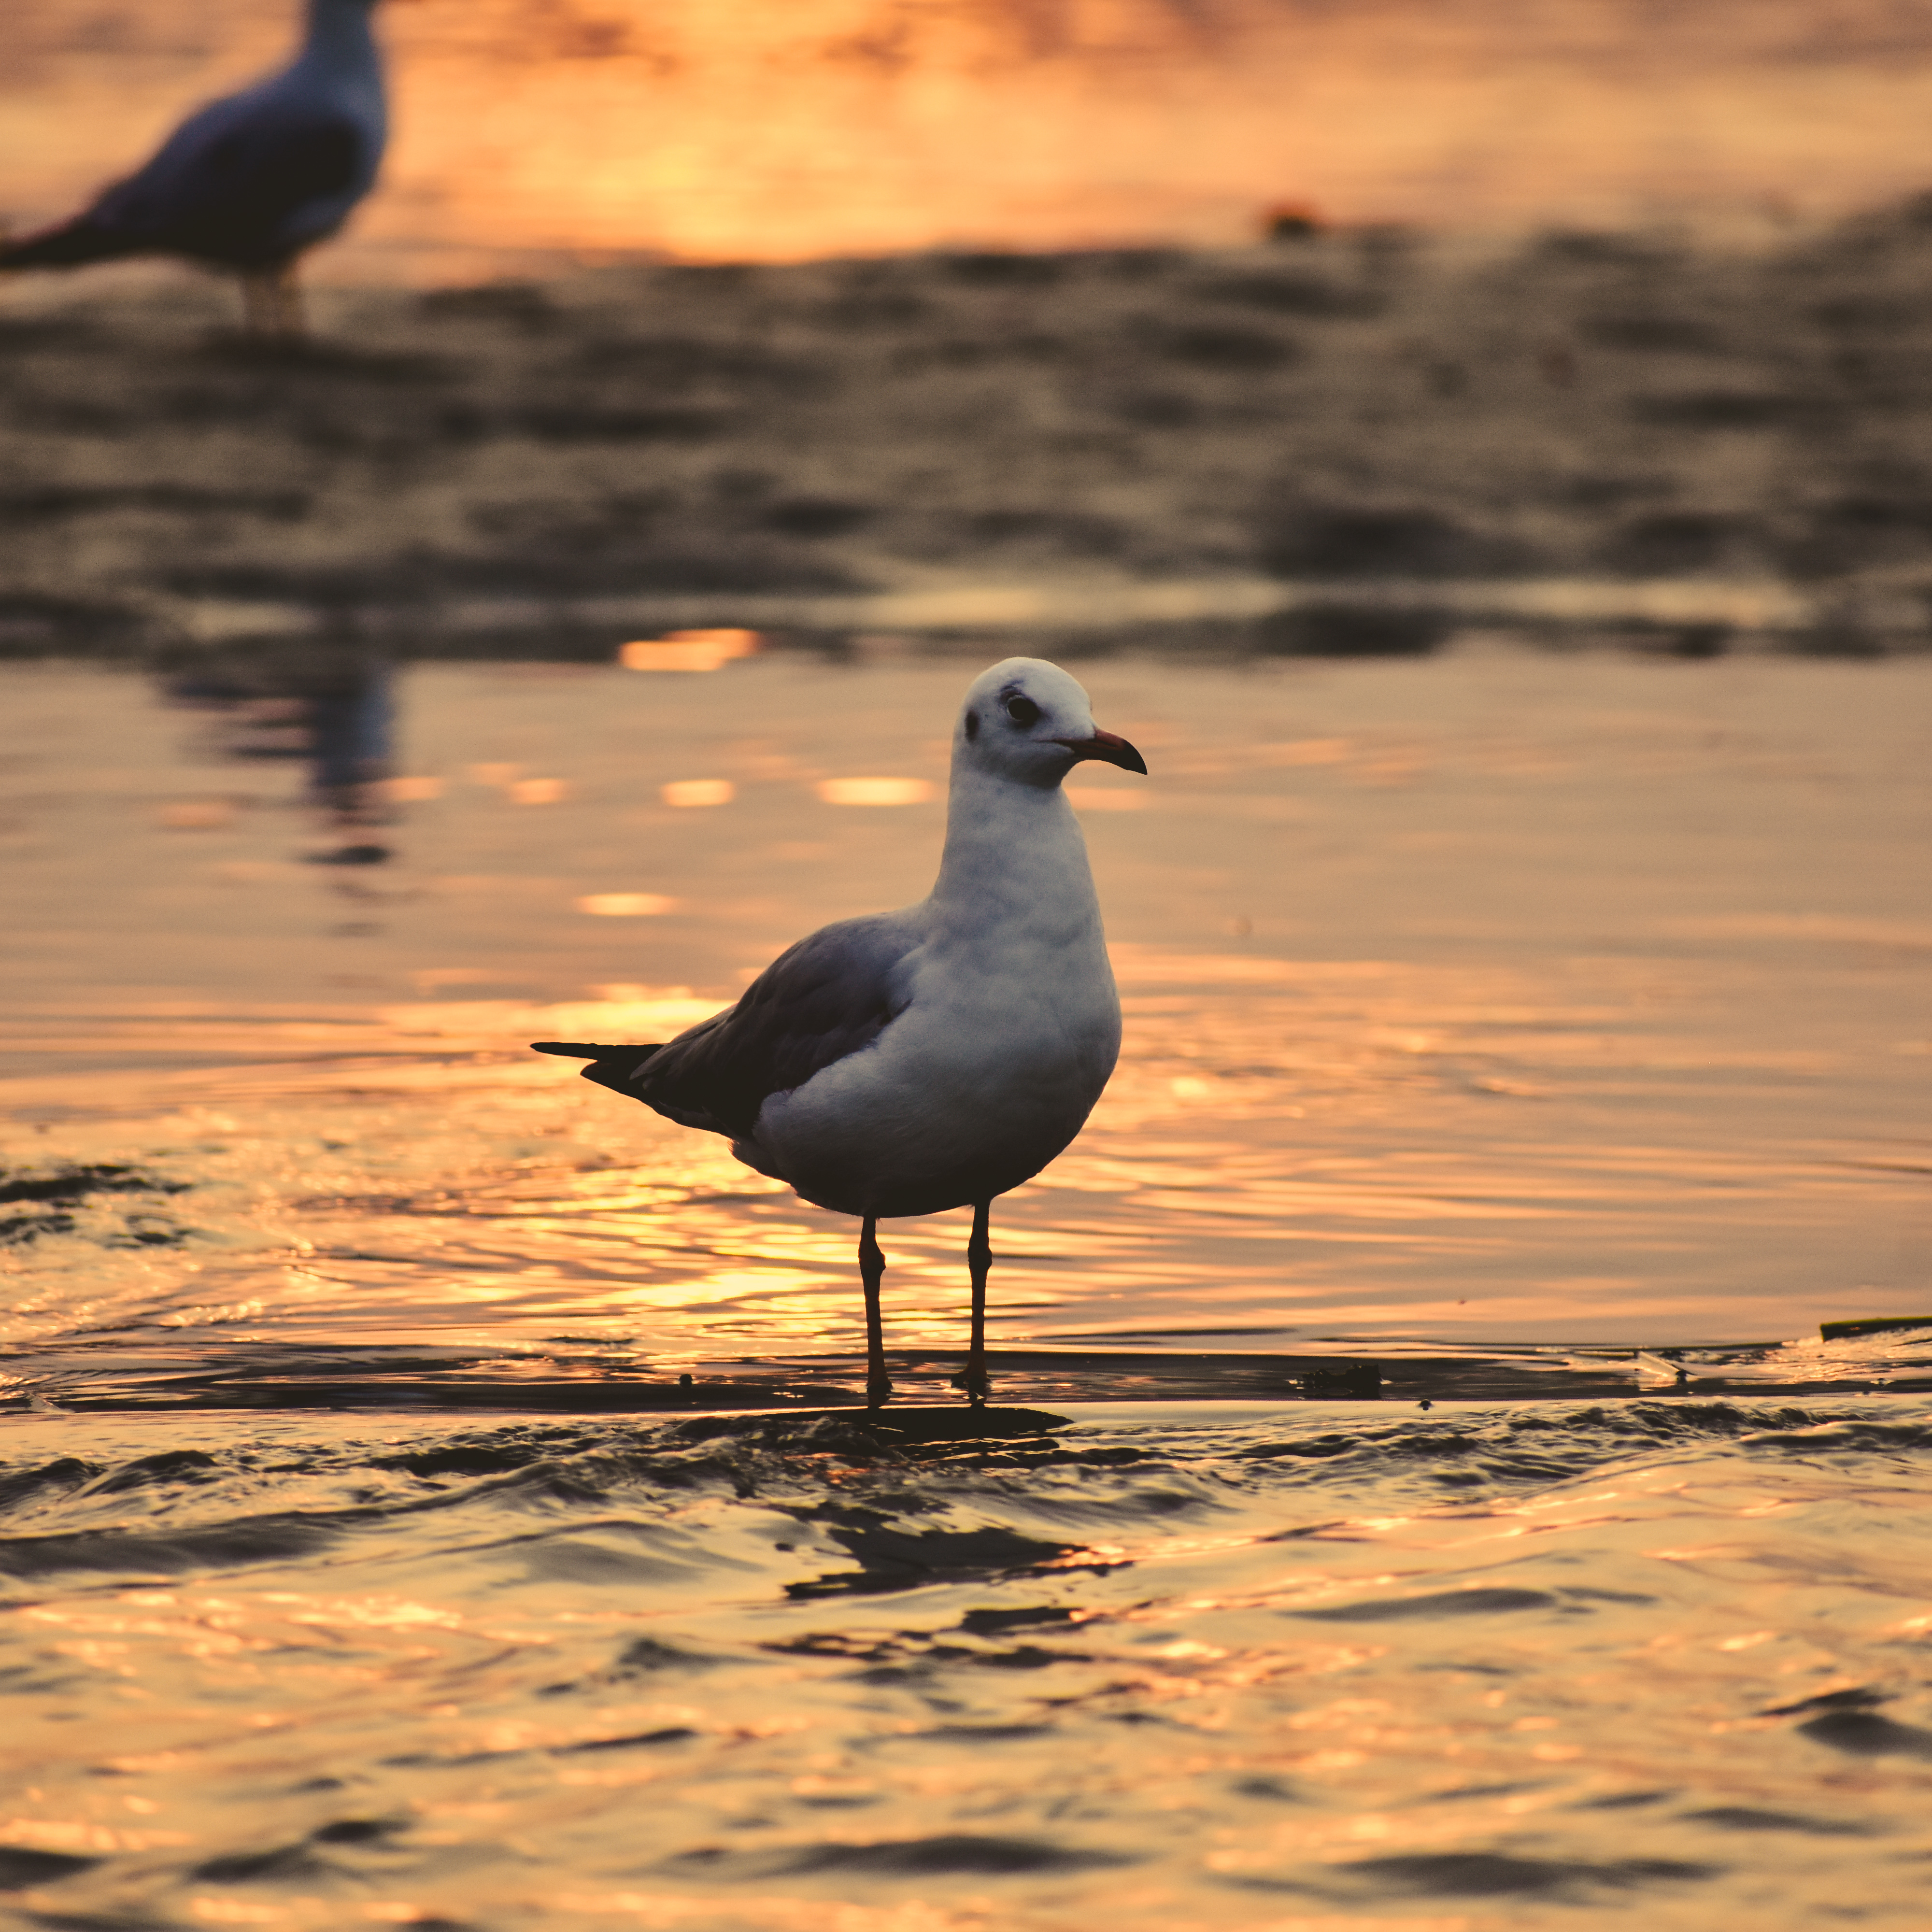 Stock Image of Seagull Bird beside the sore of the sea in the sunset